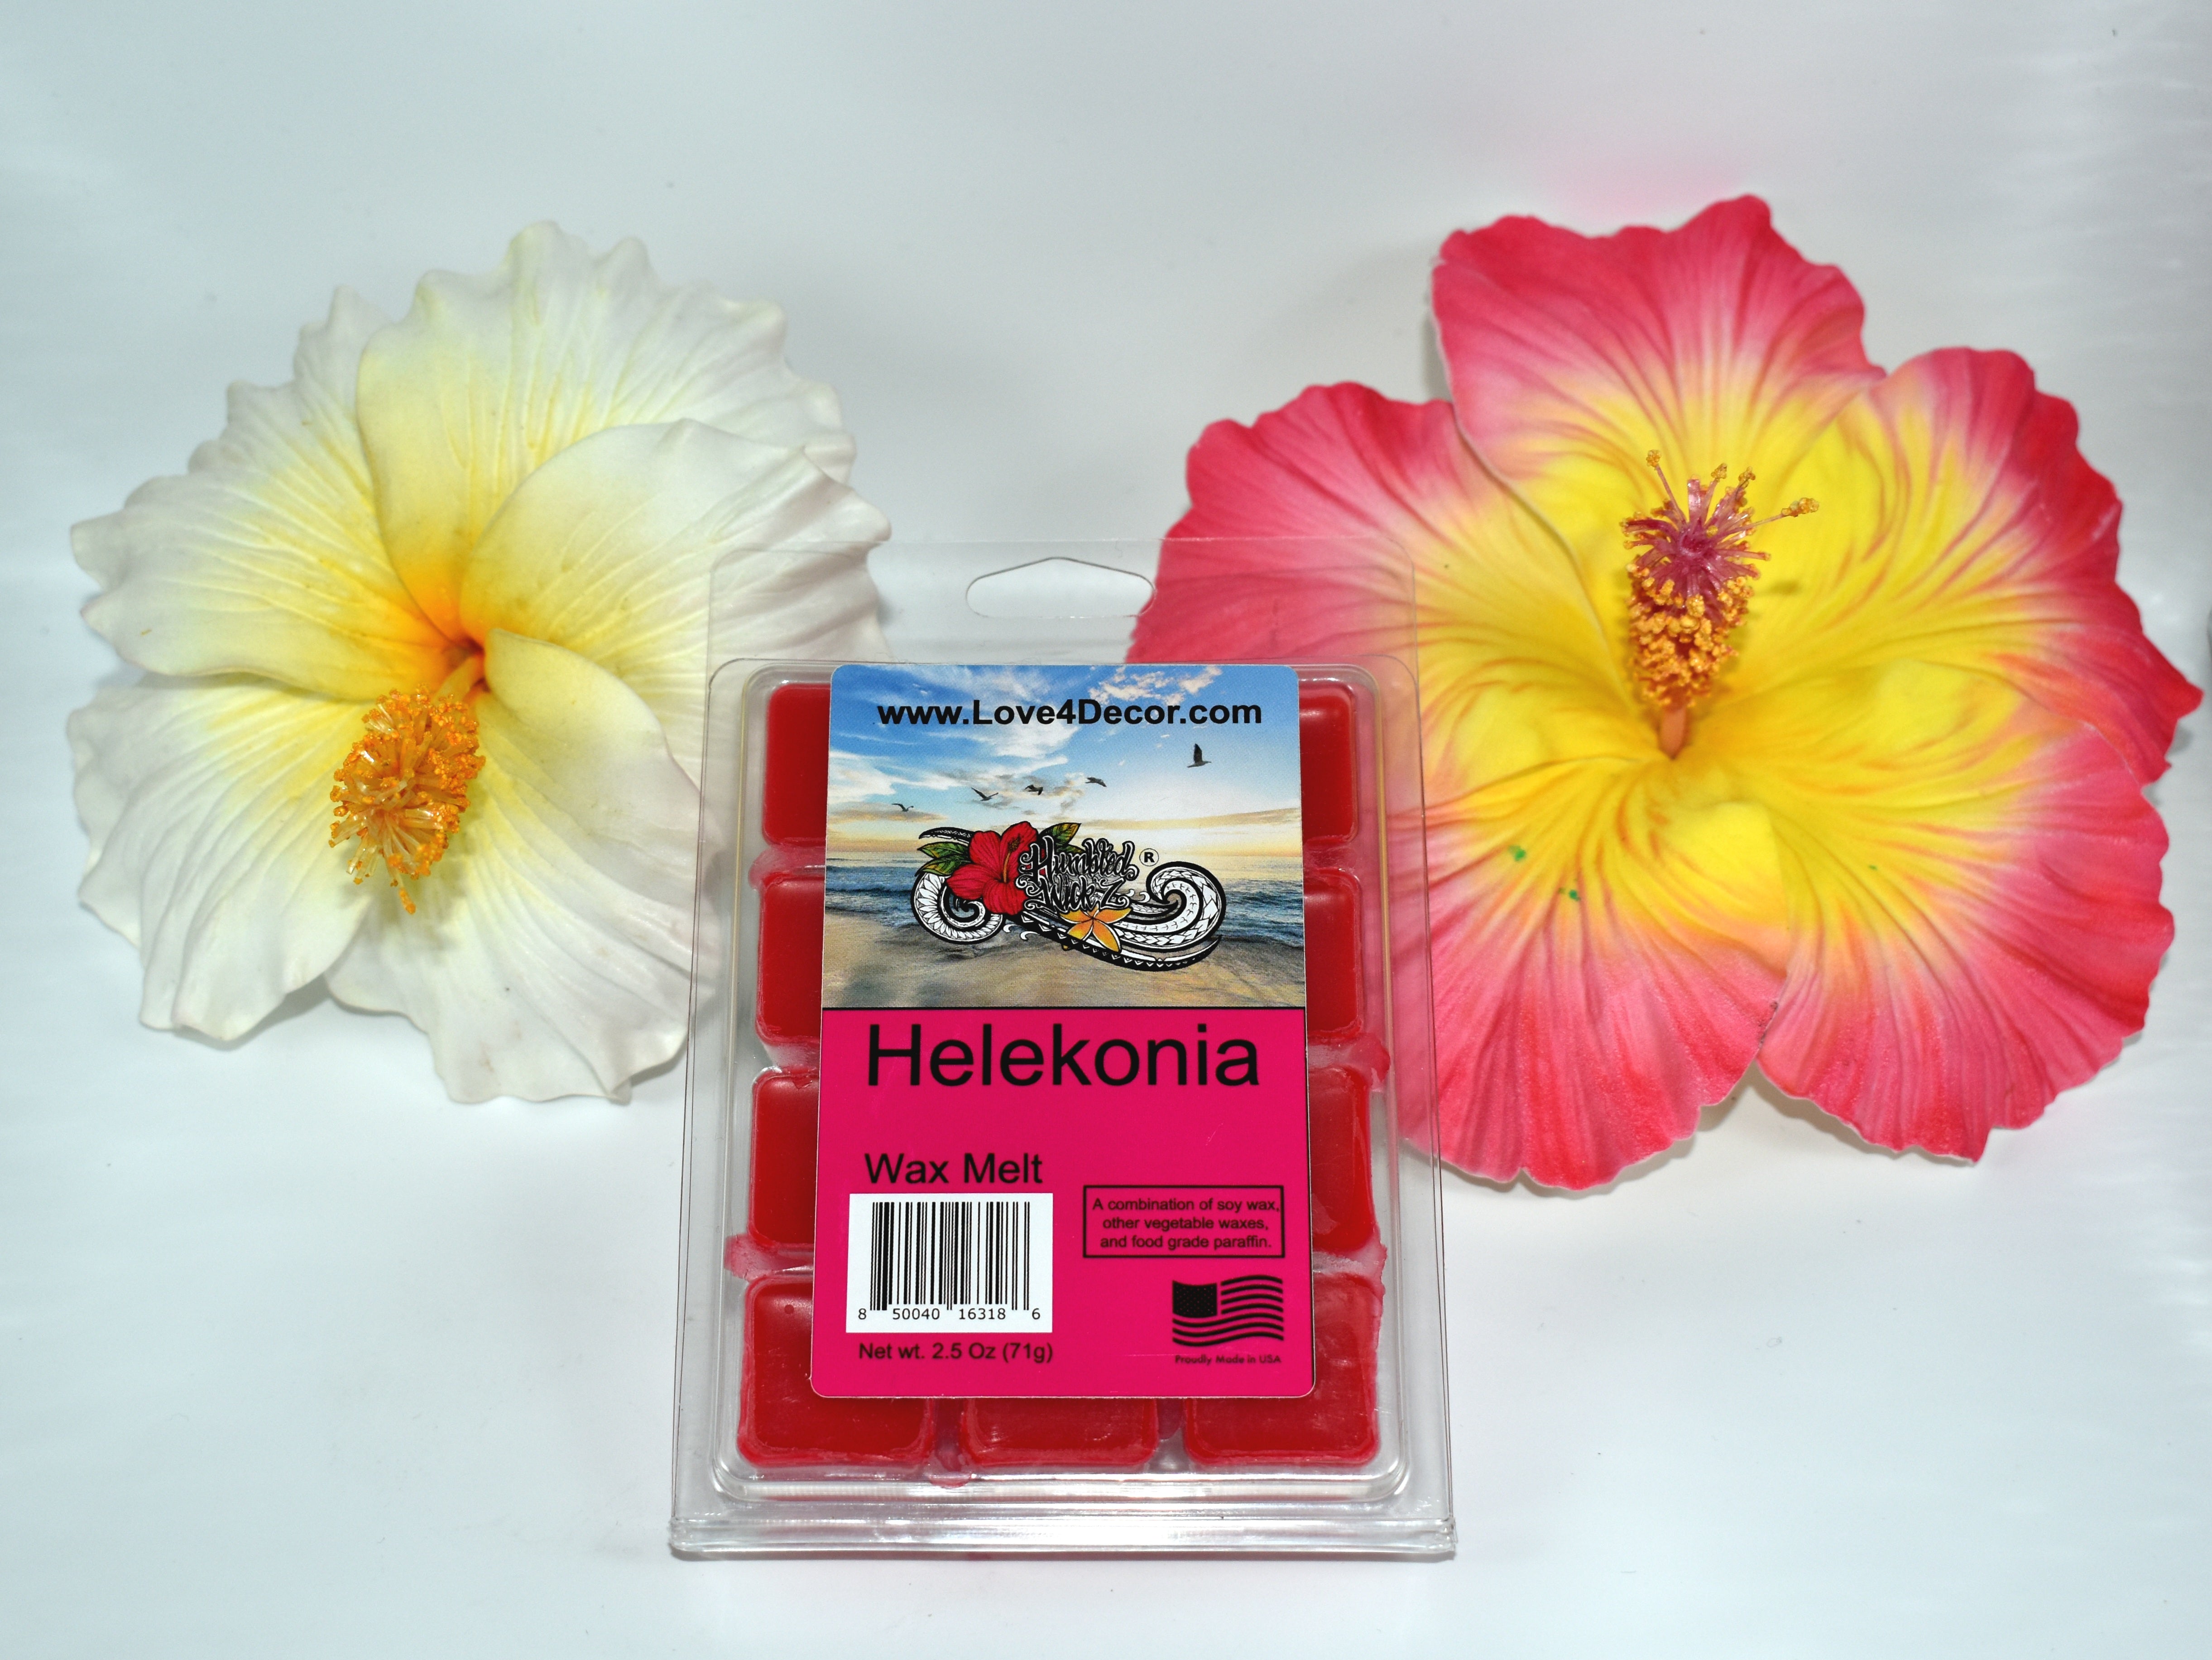 The Helekonia Scent